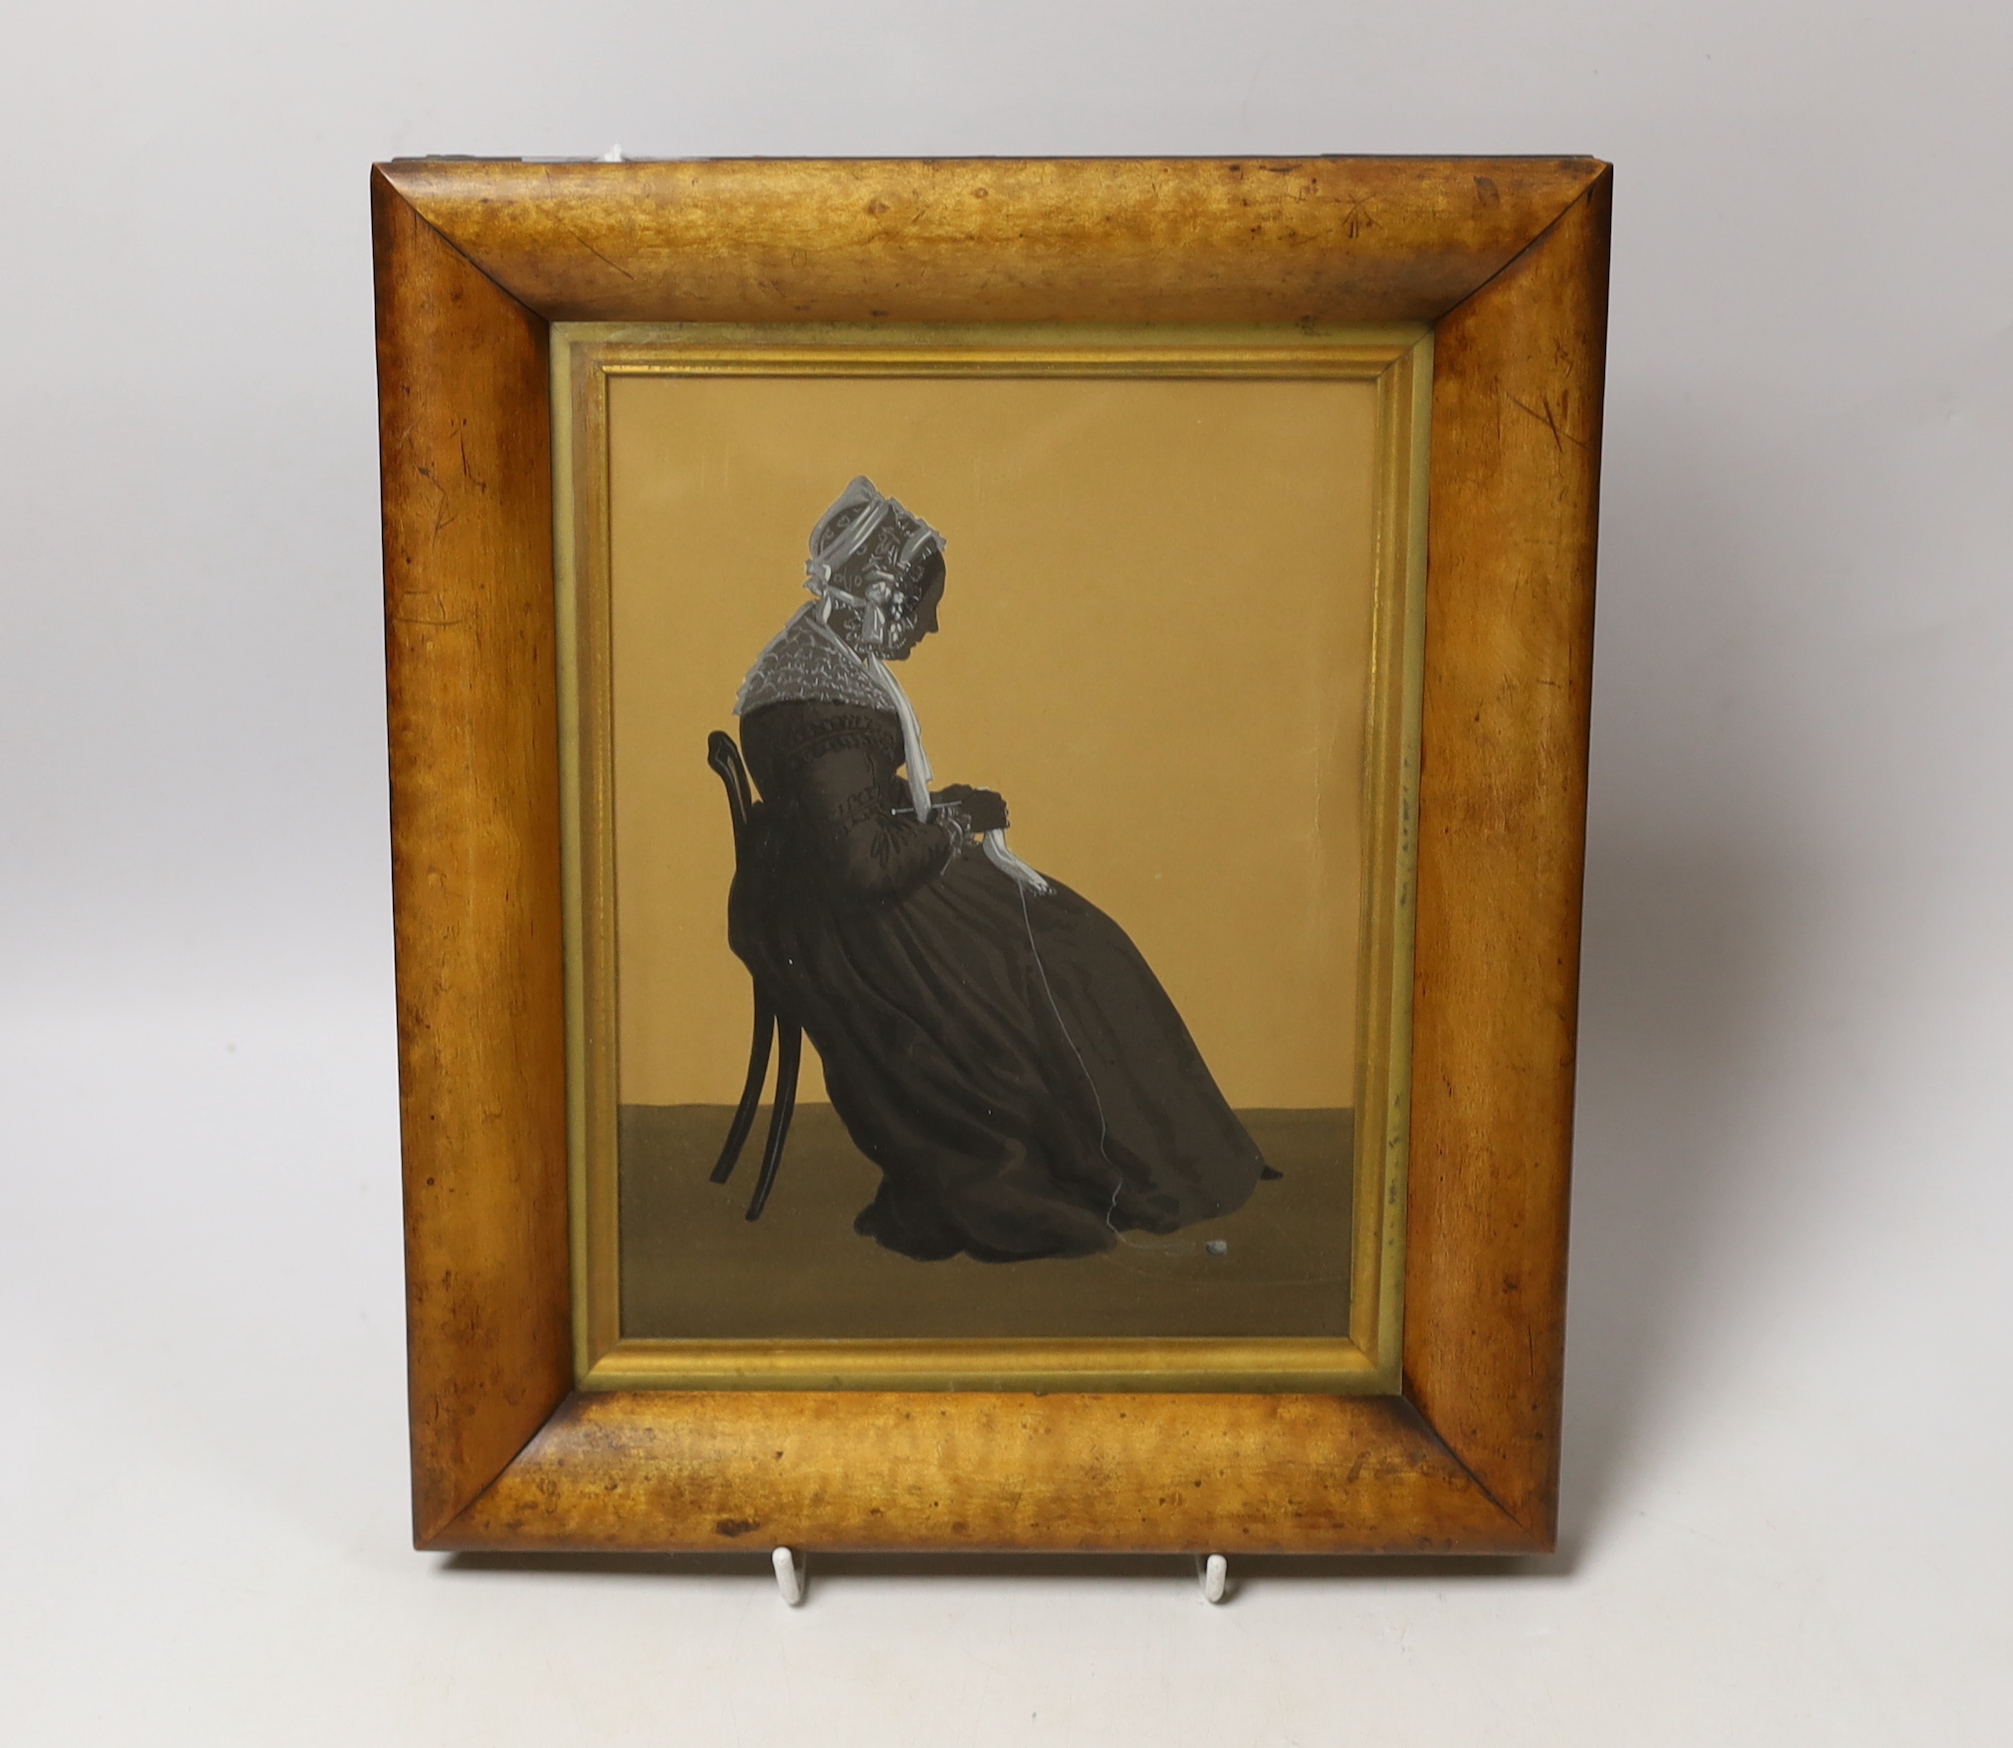 A maple framed 19th century silhouette